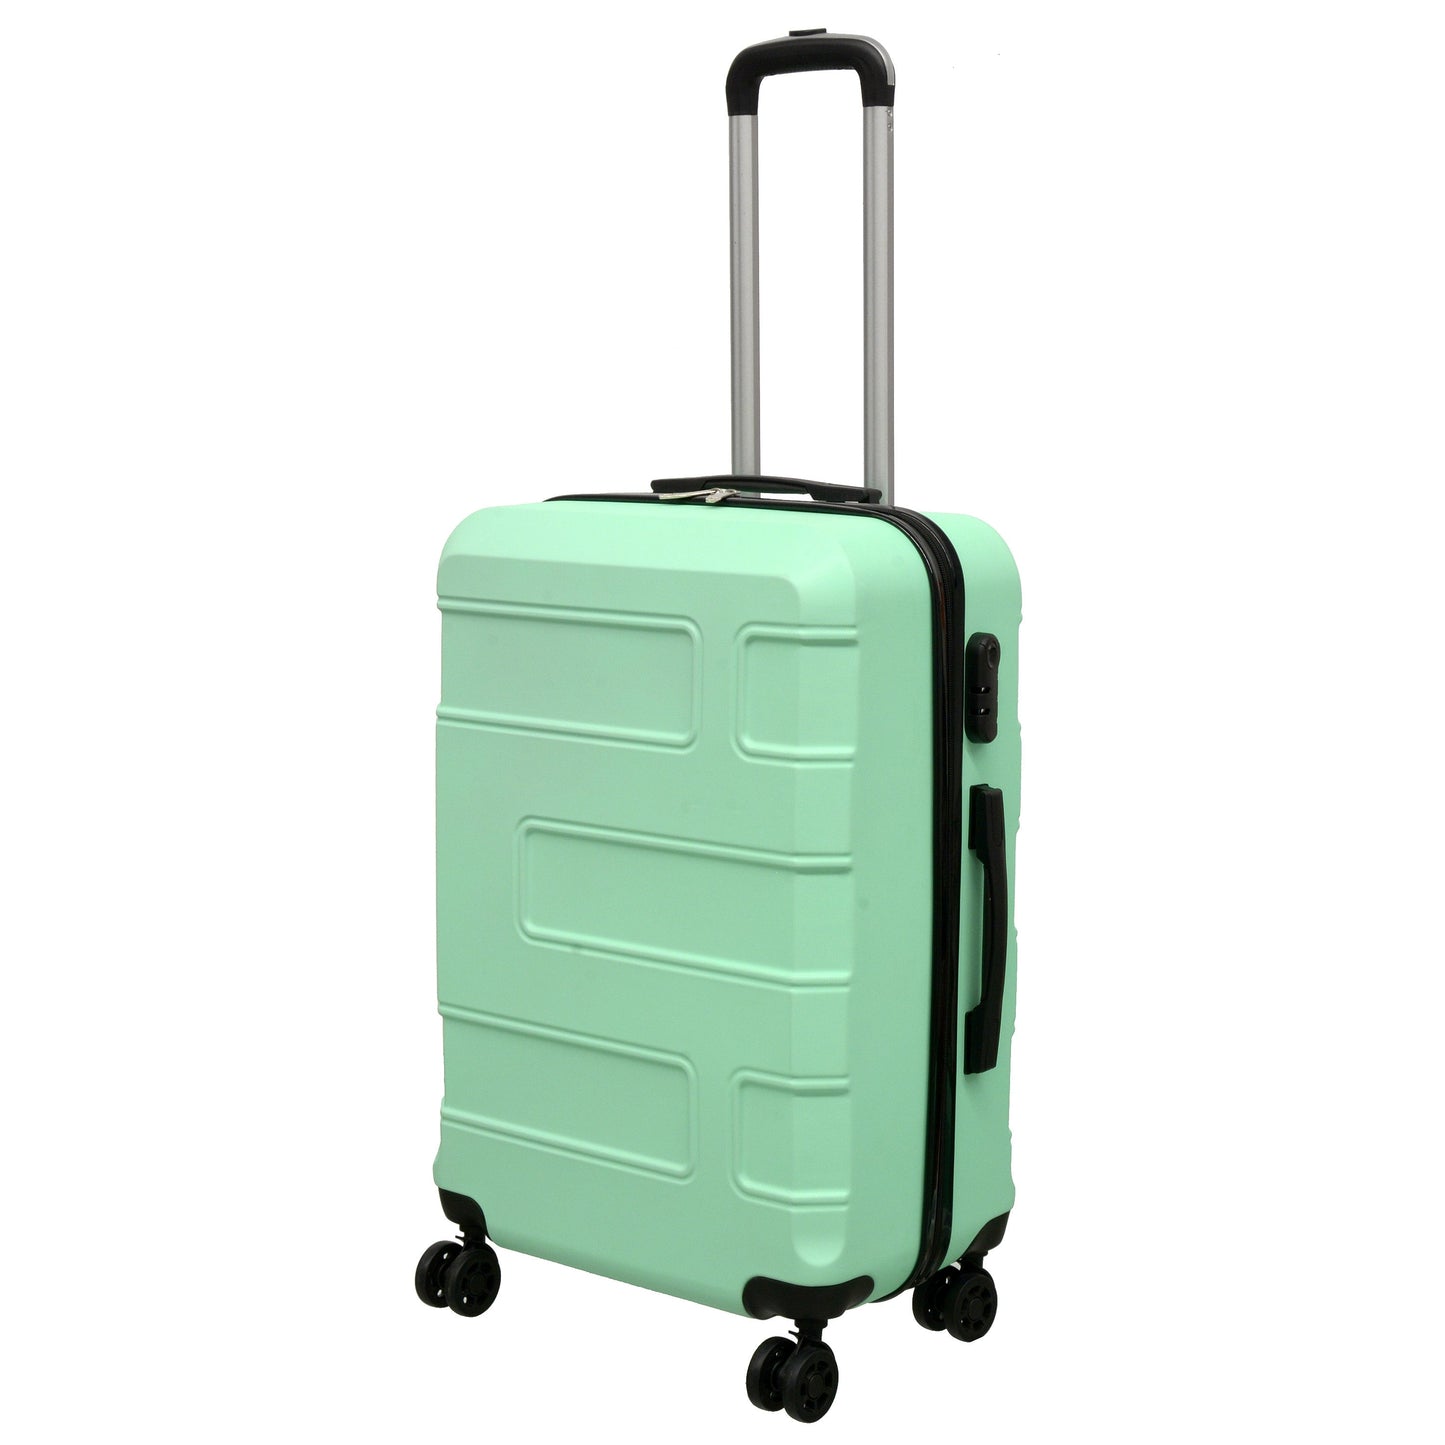 20" Carry-on Luggage Deco Collection